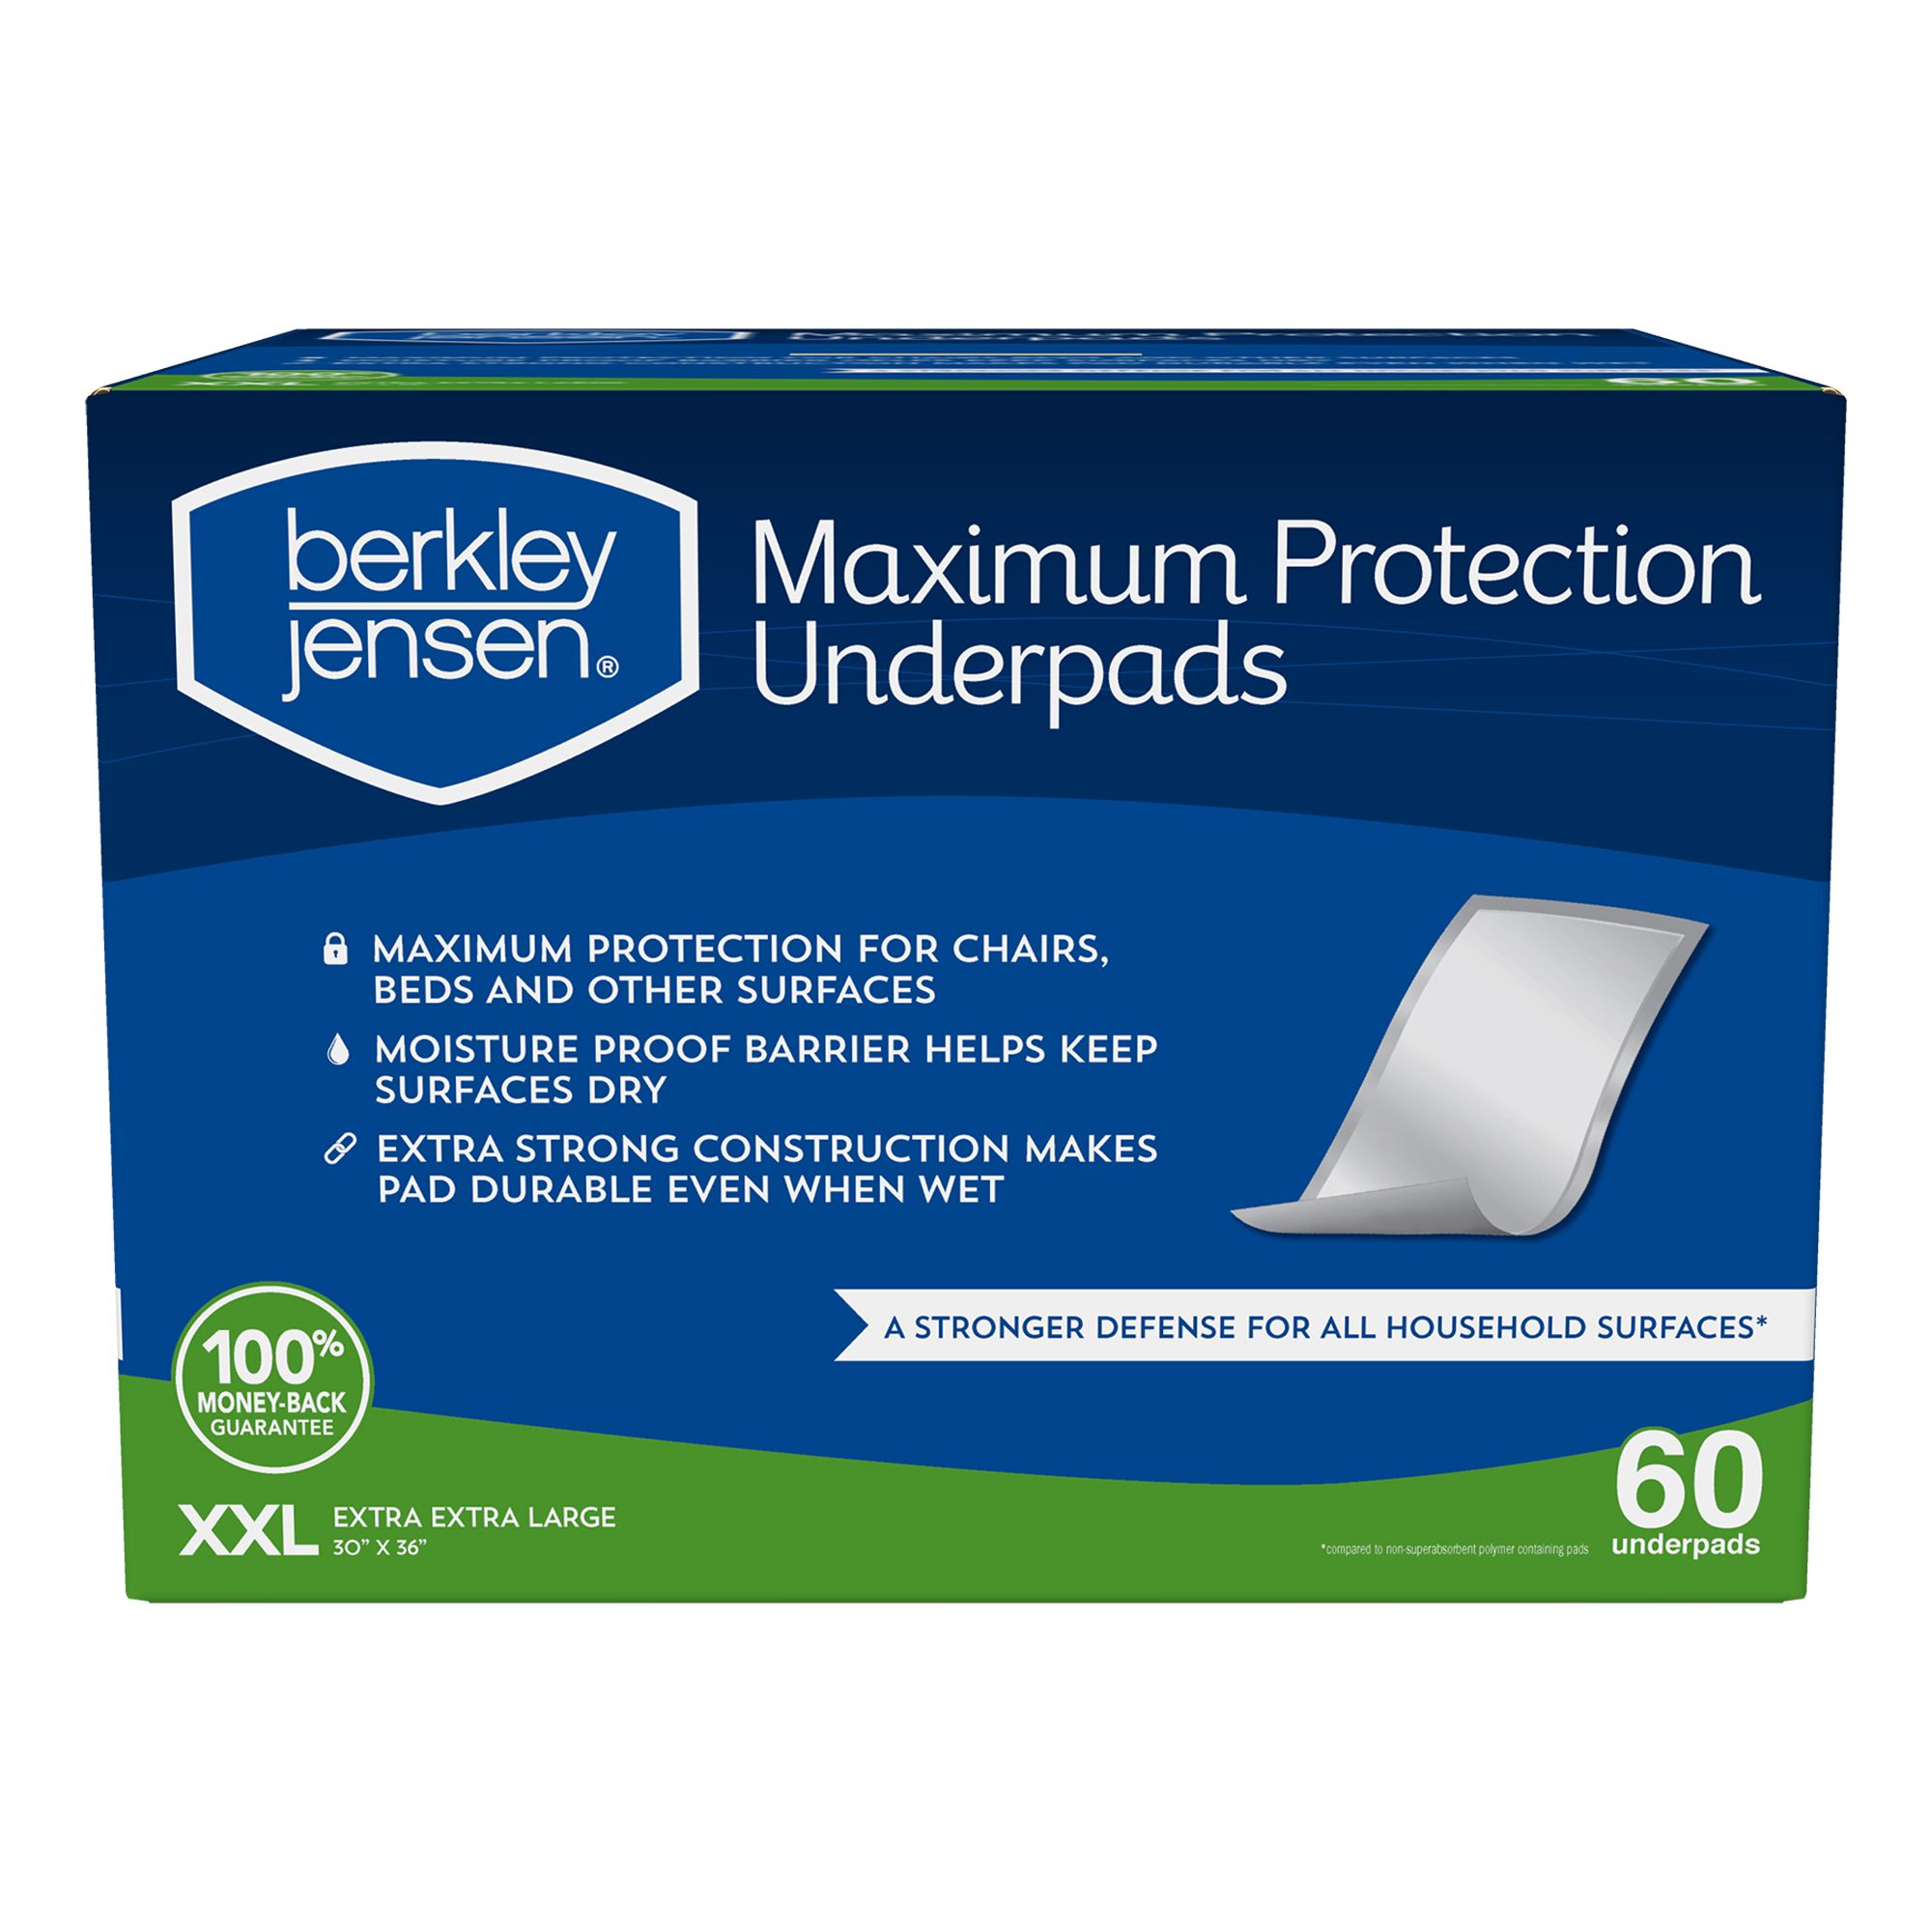 Disposable Bed Pads for Incontinence, 60 Count Disposable